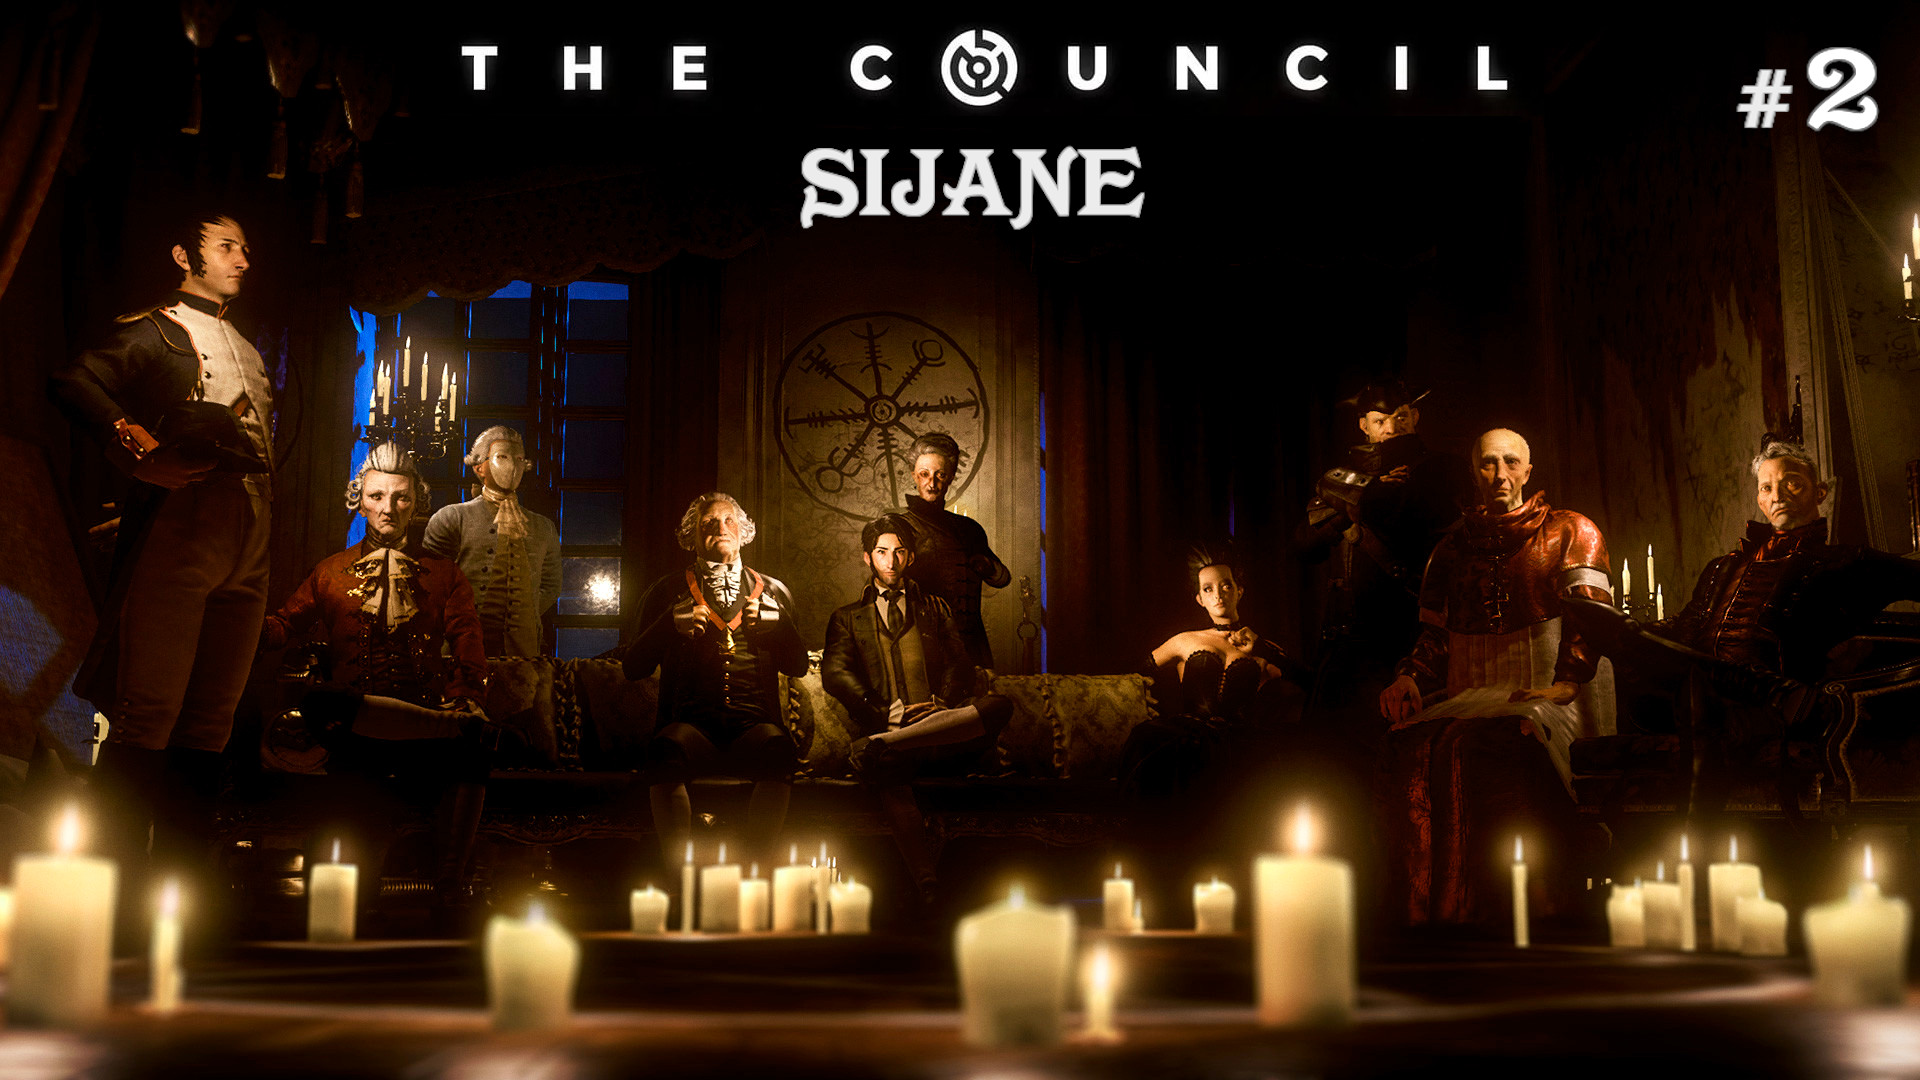 The Council #2